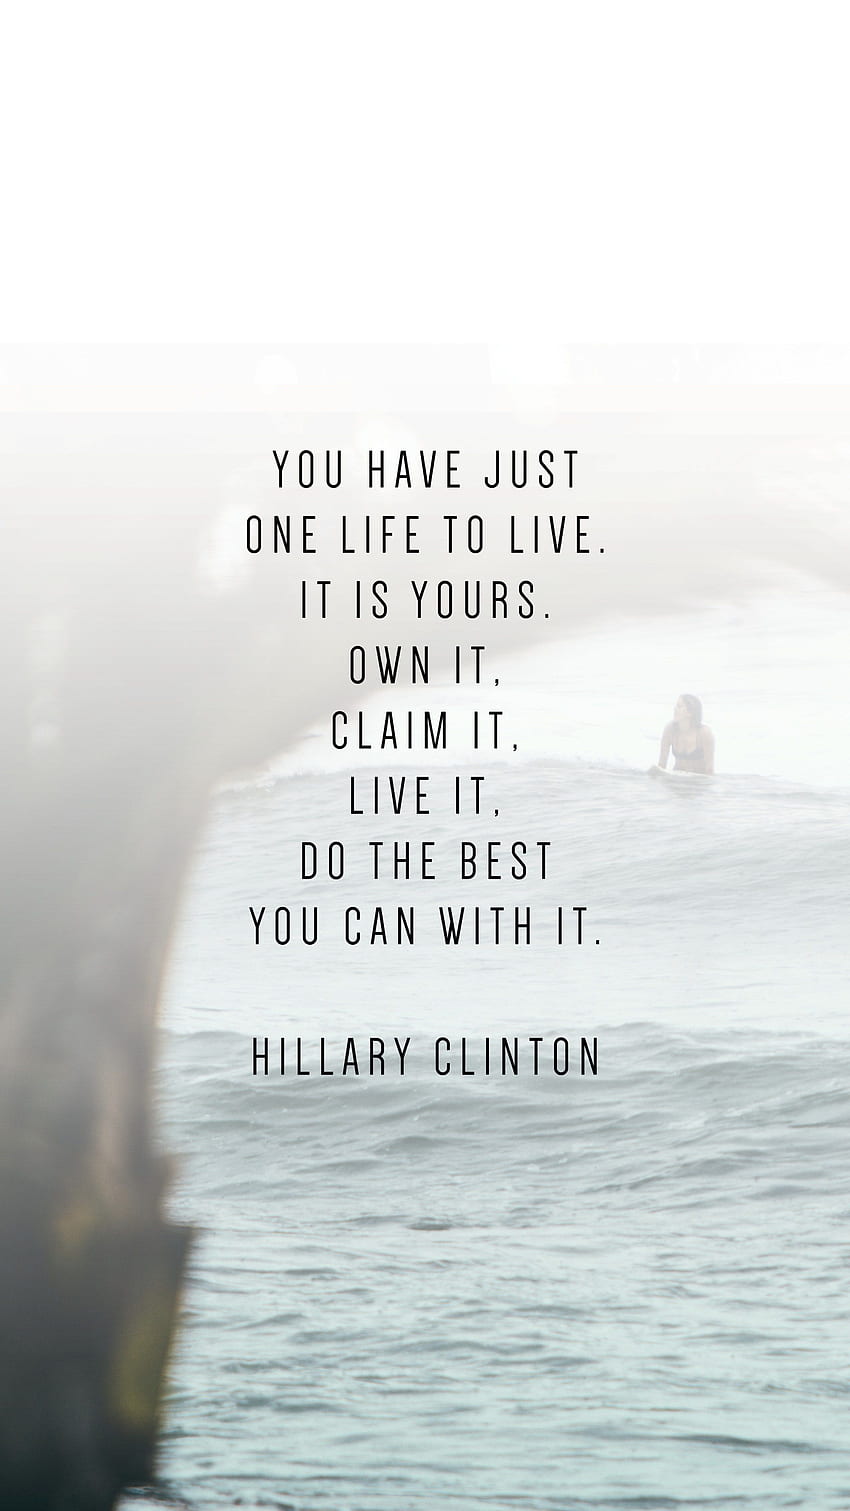 Phone Quotes To Inspire Your New Year. Phone quotes, Life quotes, Quotes to live by, Hillary Clinton HD phone wallpaper